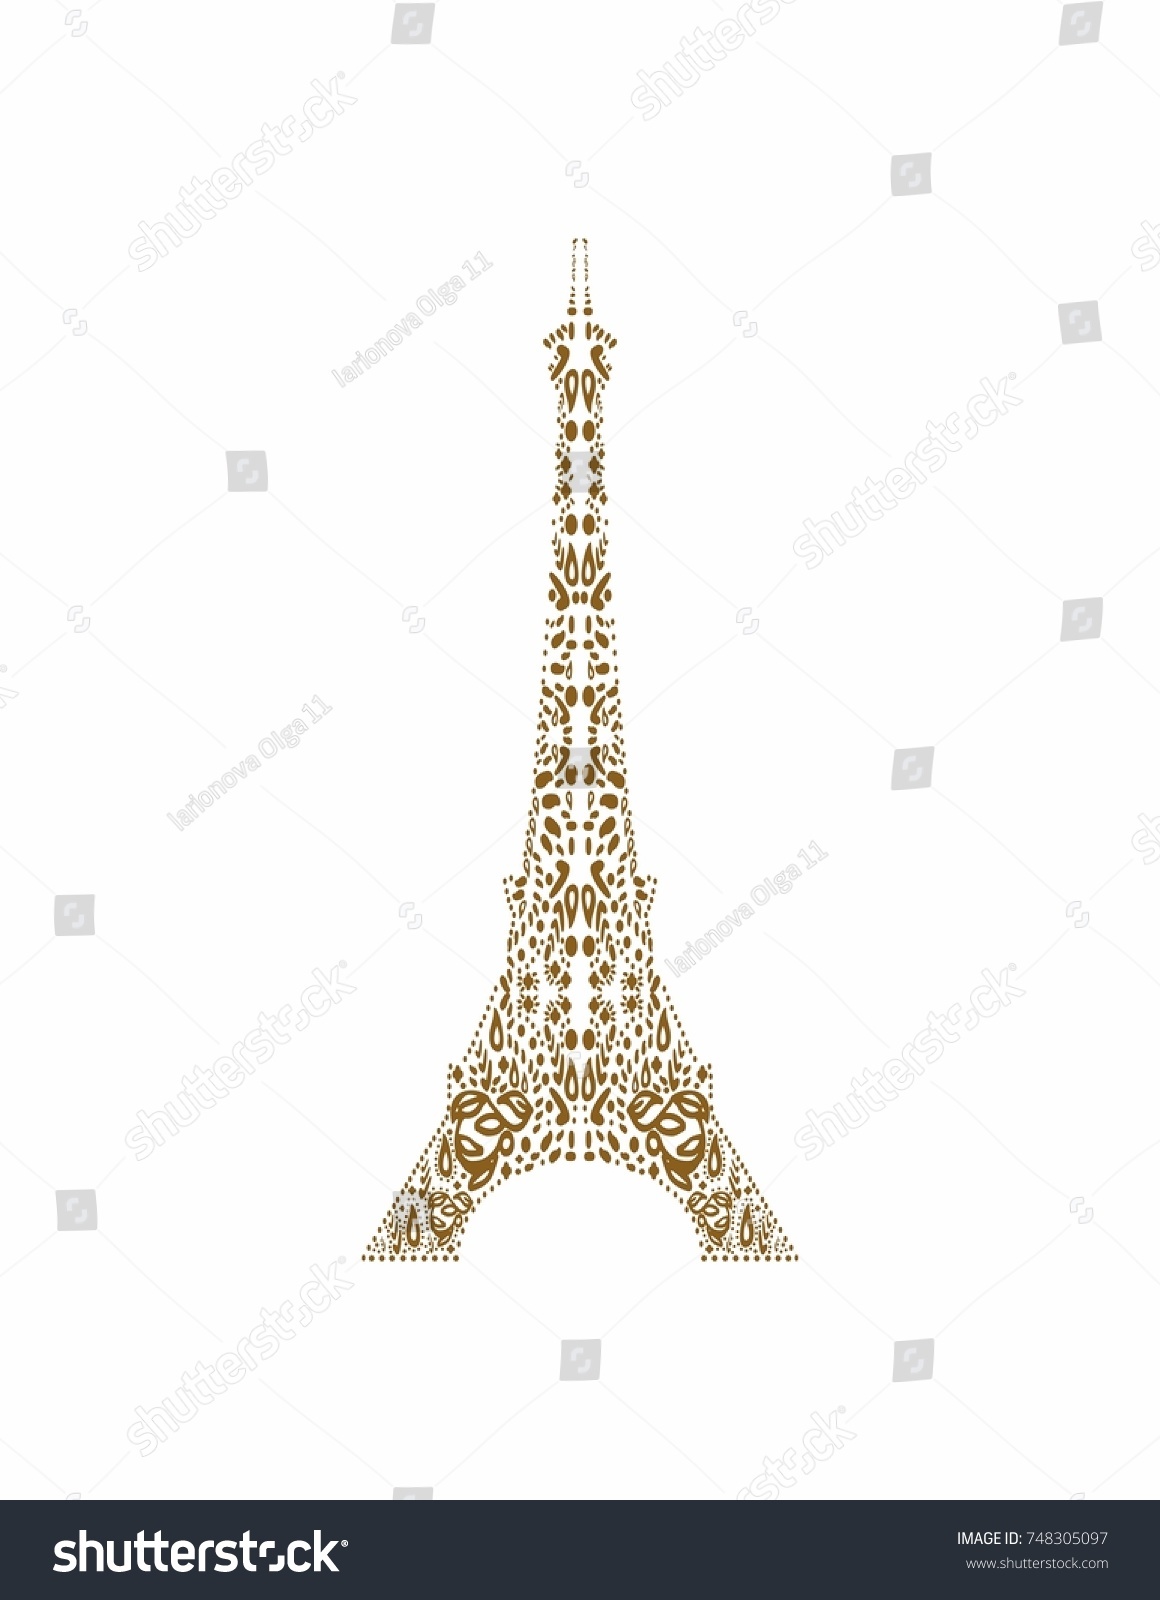 Eiffel tower pattern on a transparent background